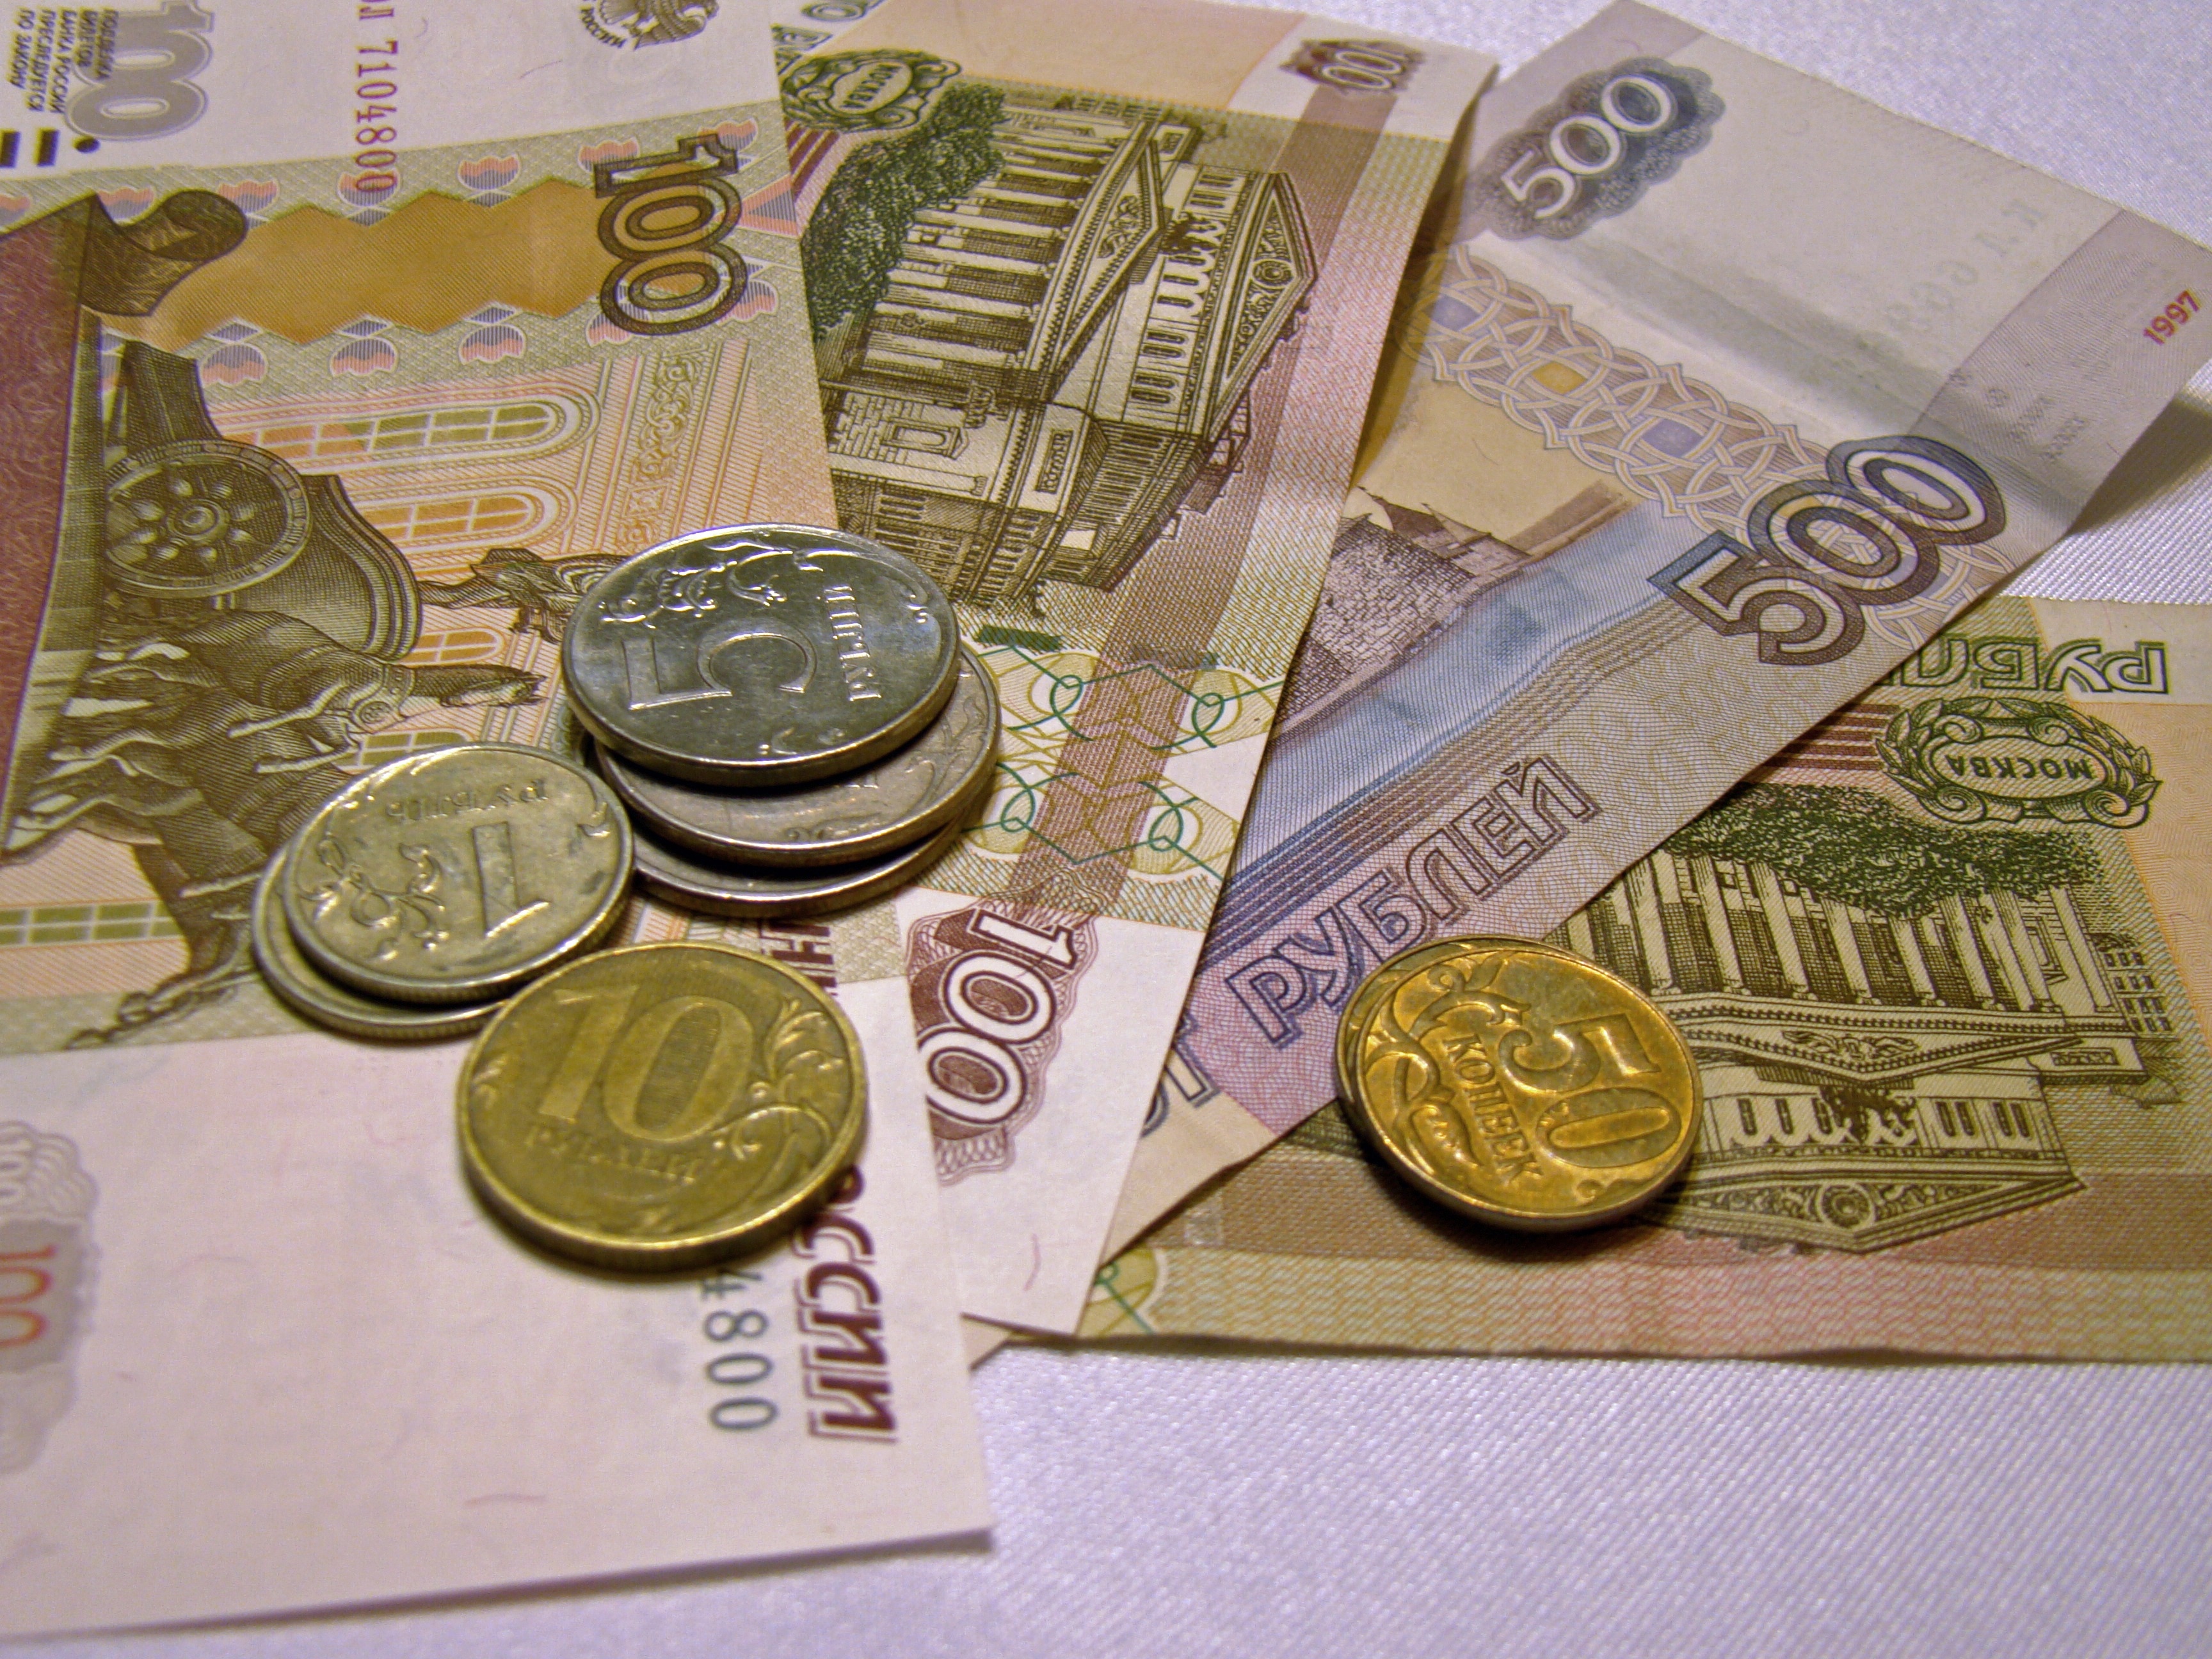 banknotes and coins